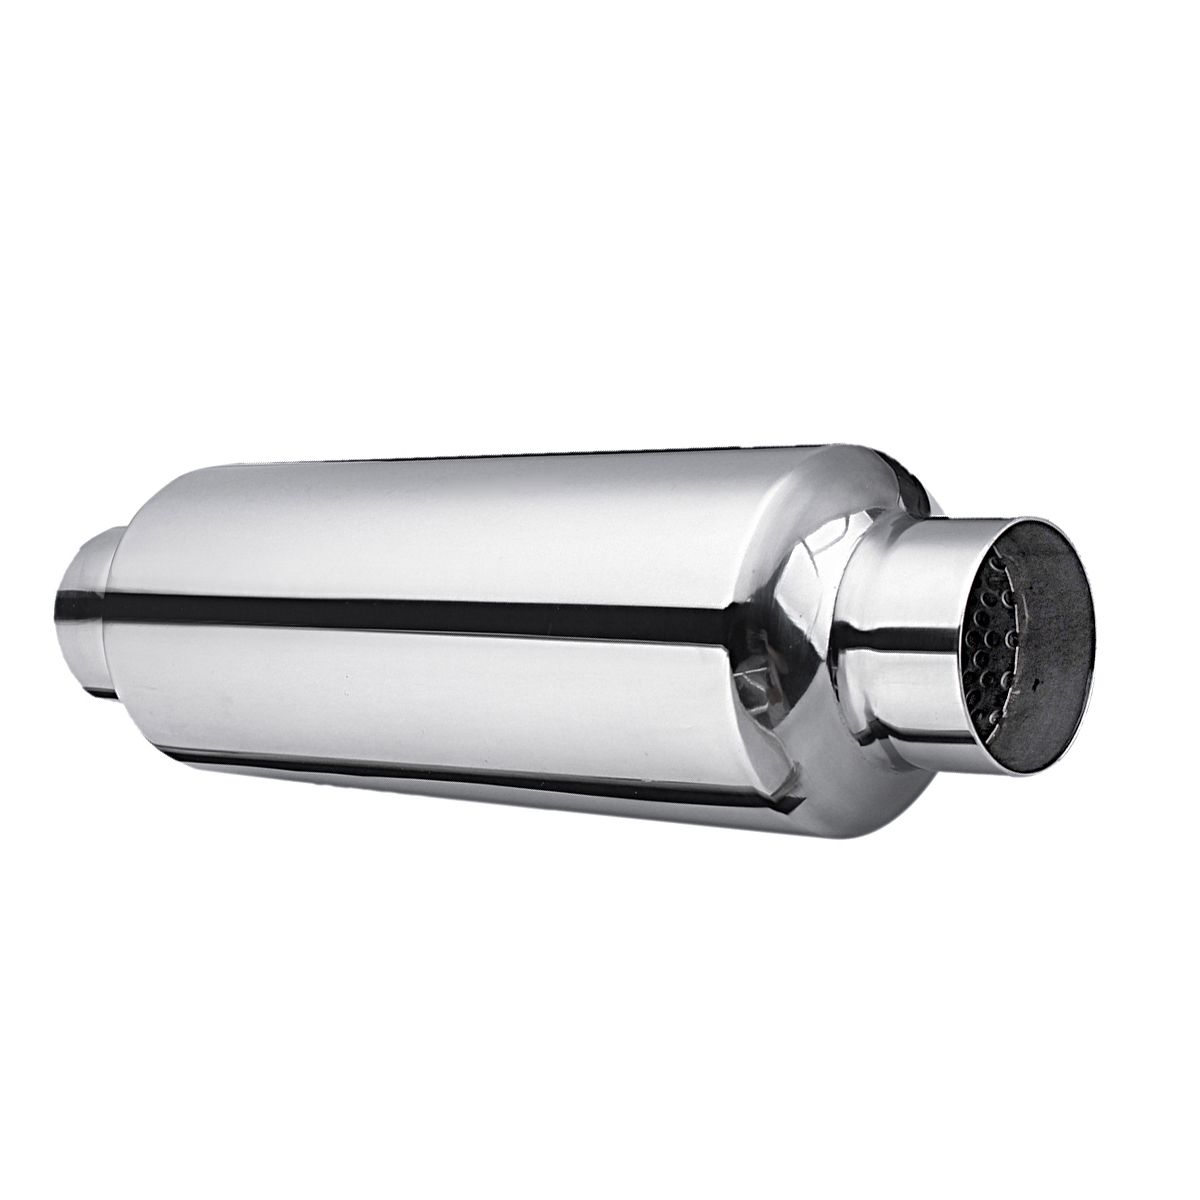 Universal-Turbine-Exhaust-Muffler-Resonator-304-Stainless-Steel-25-Inch-Inlet-25-Inch-Outlet-1436400